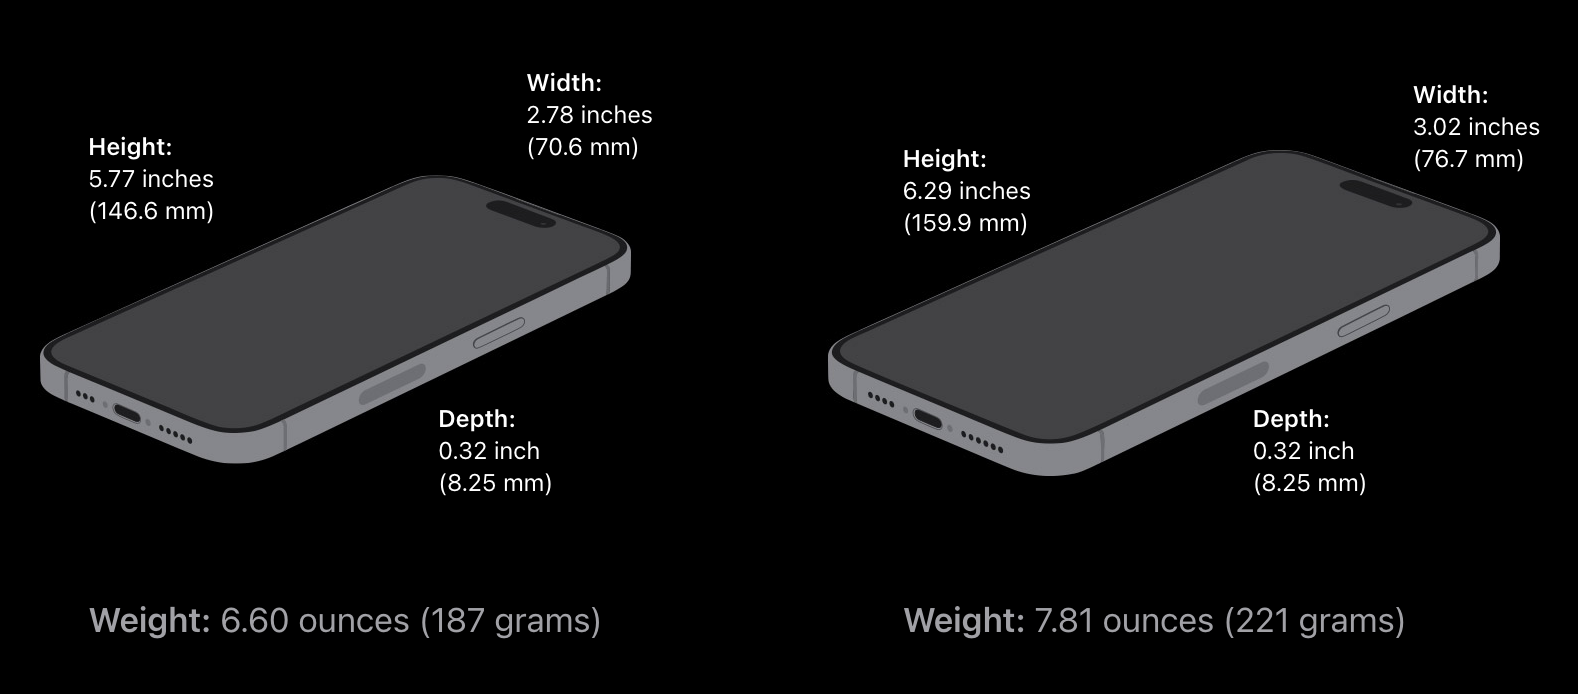 iPhone 15 Pro and iPhone 15 Pro Max model size and weight